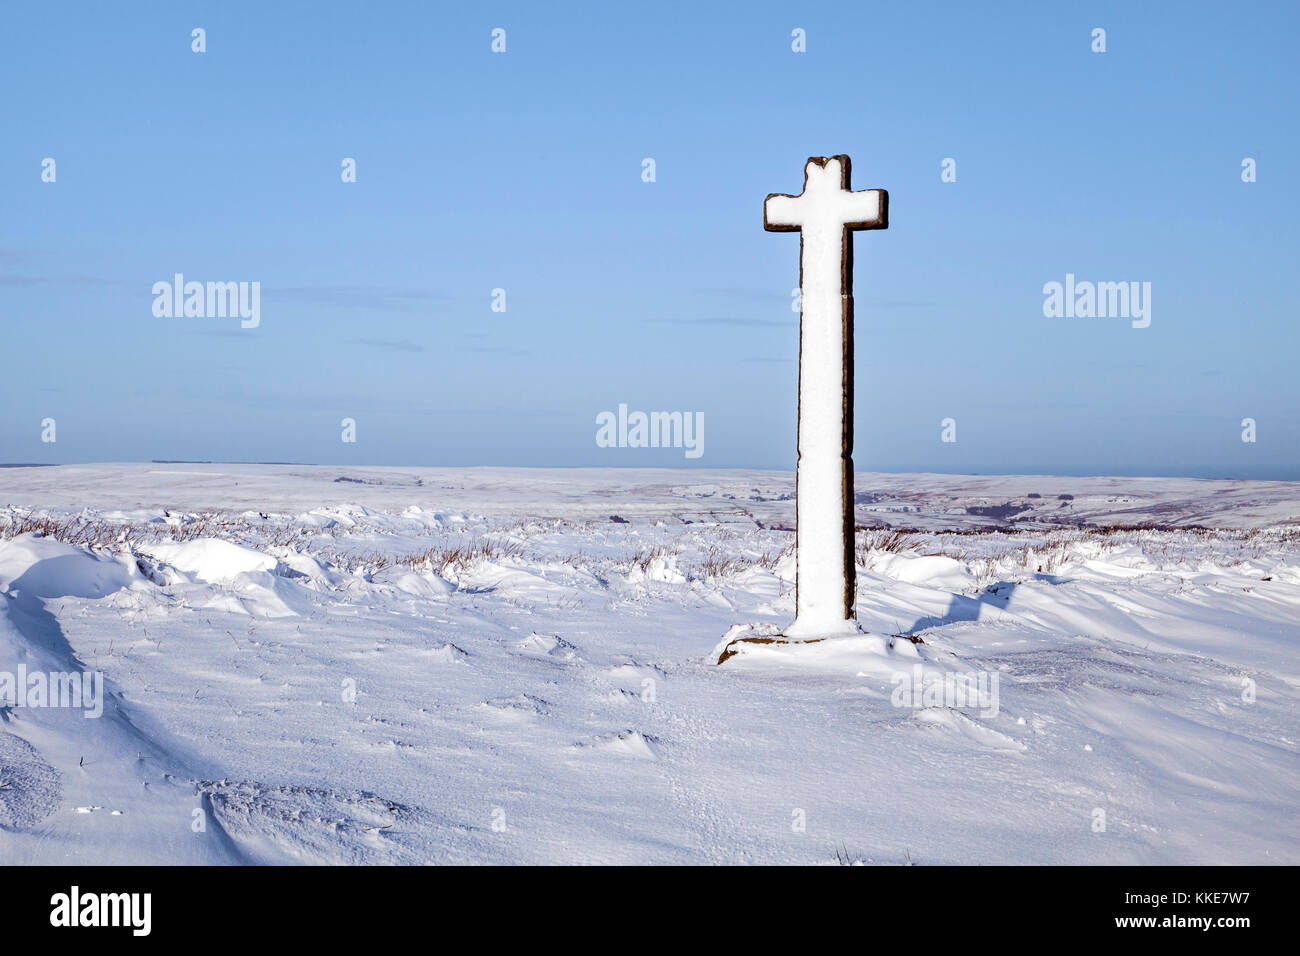 Snowy Young Ralph Cross [emblem of the North York Moors national park] Westerdale Moor North York Moors national park North Yorkshire Stock Photo